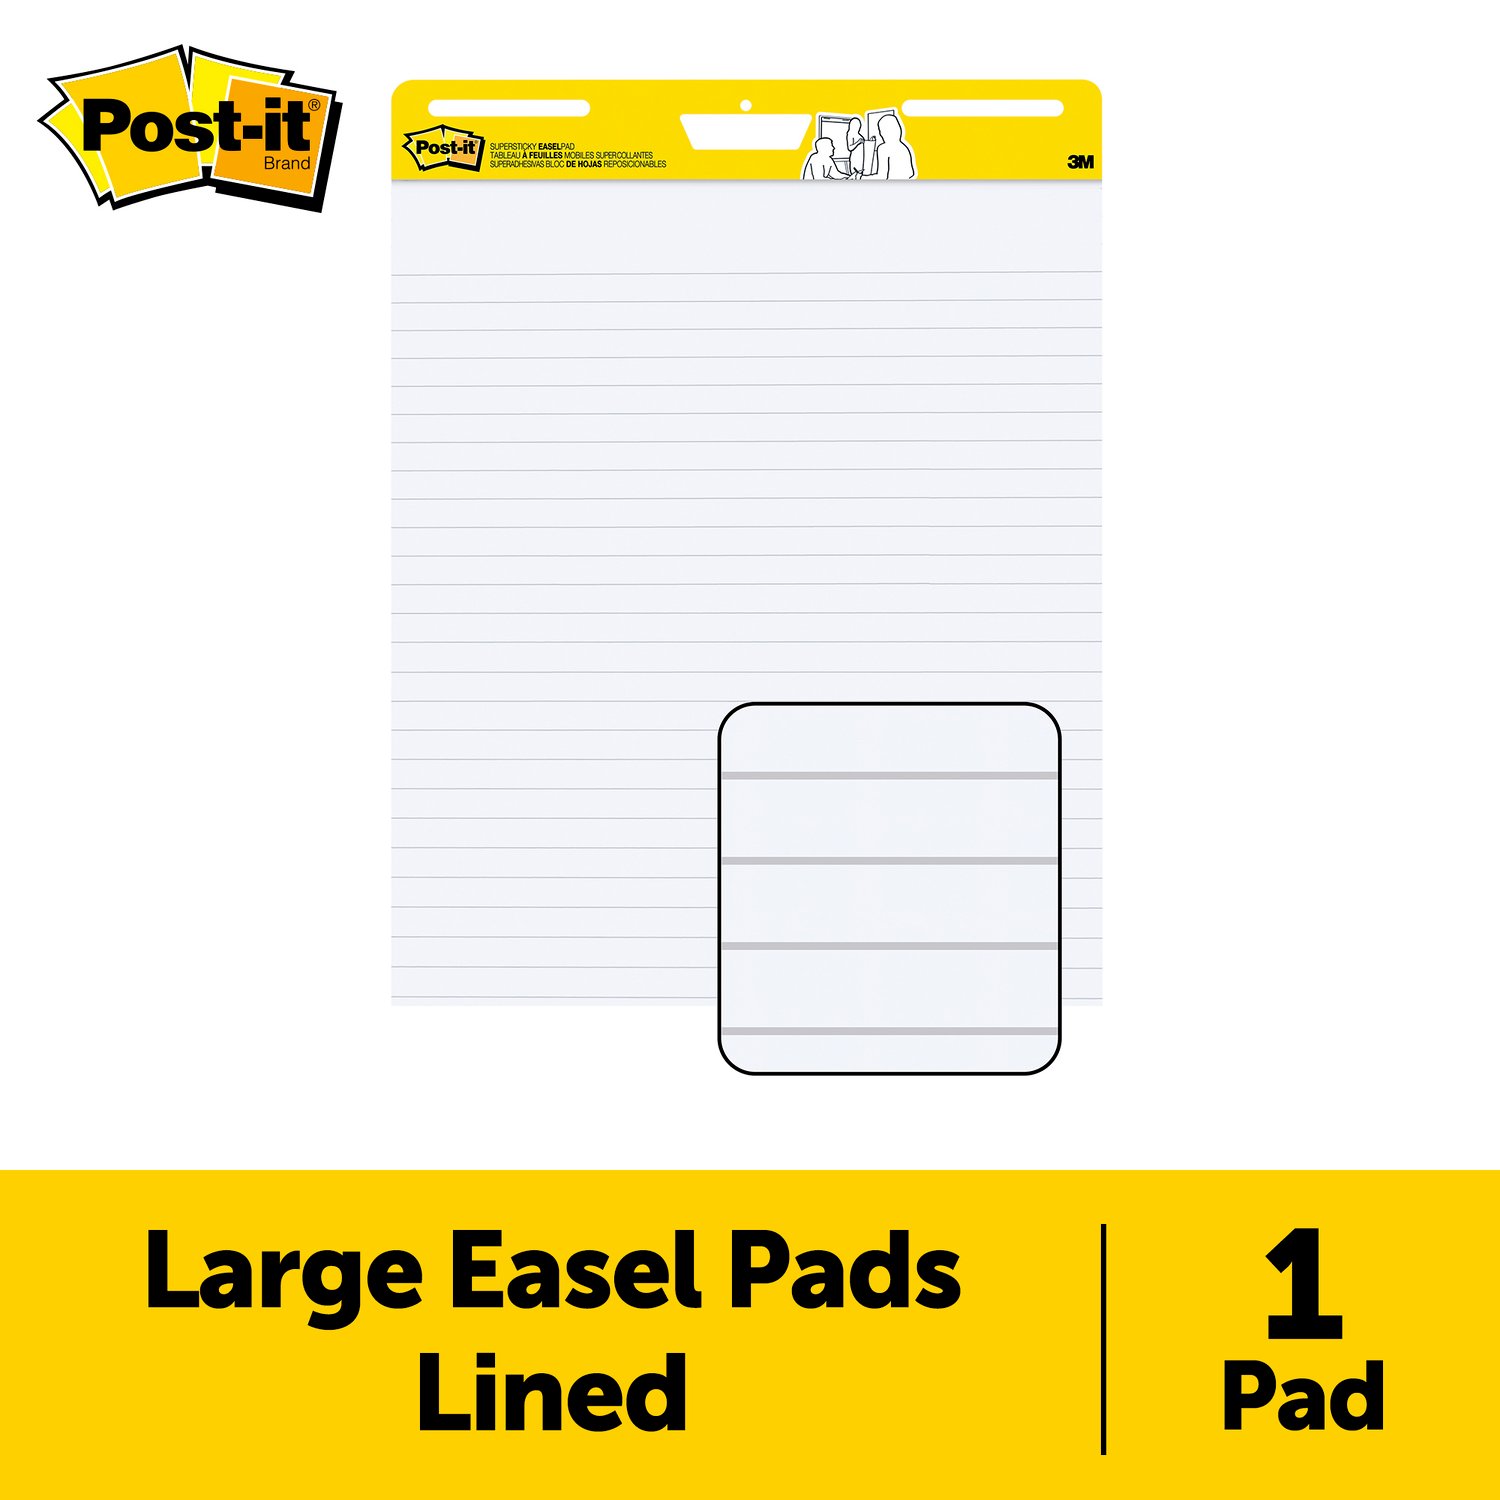 7100222205 - Post-it Super Sticky Easel Pad Lined 561WLSS, 25 in x 30 in (63.5 cm x 76.2 cm), 30 Sheets-Pad, 1 Pad